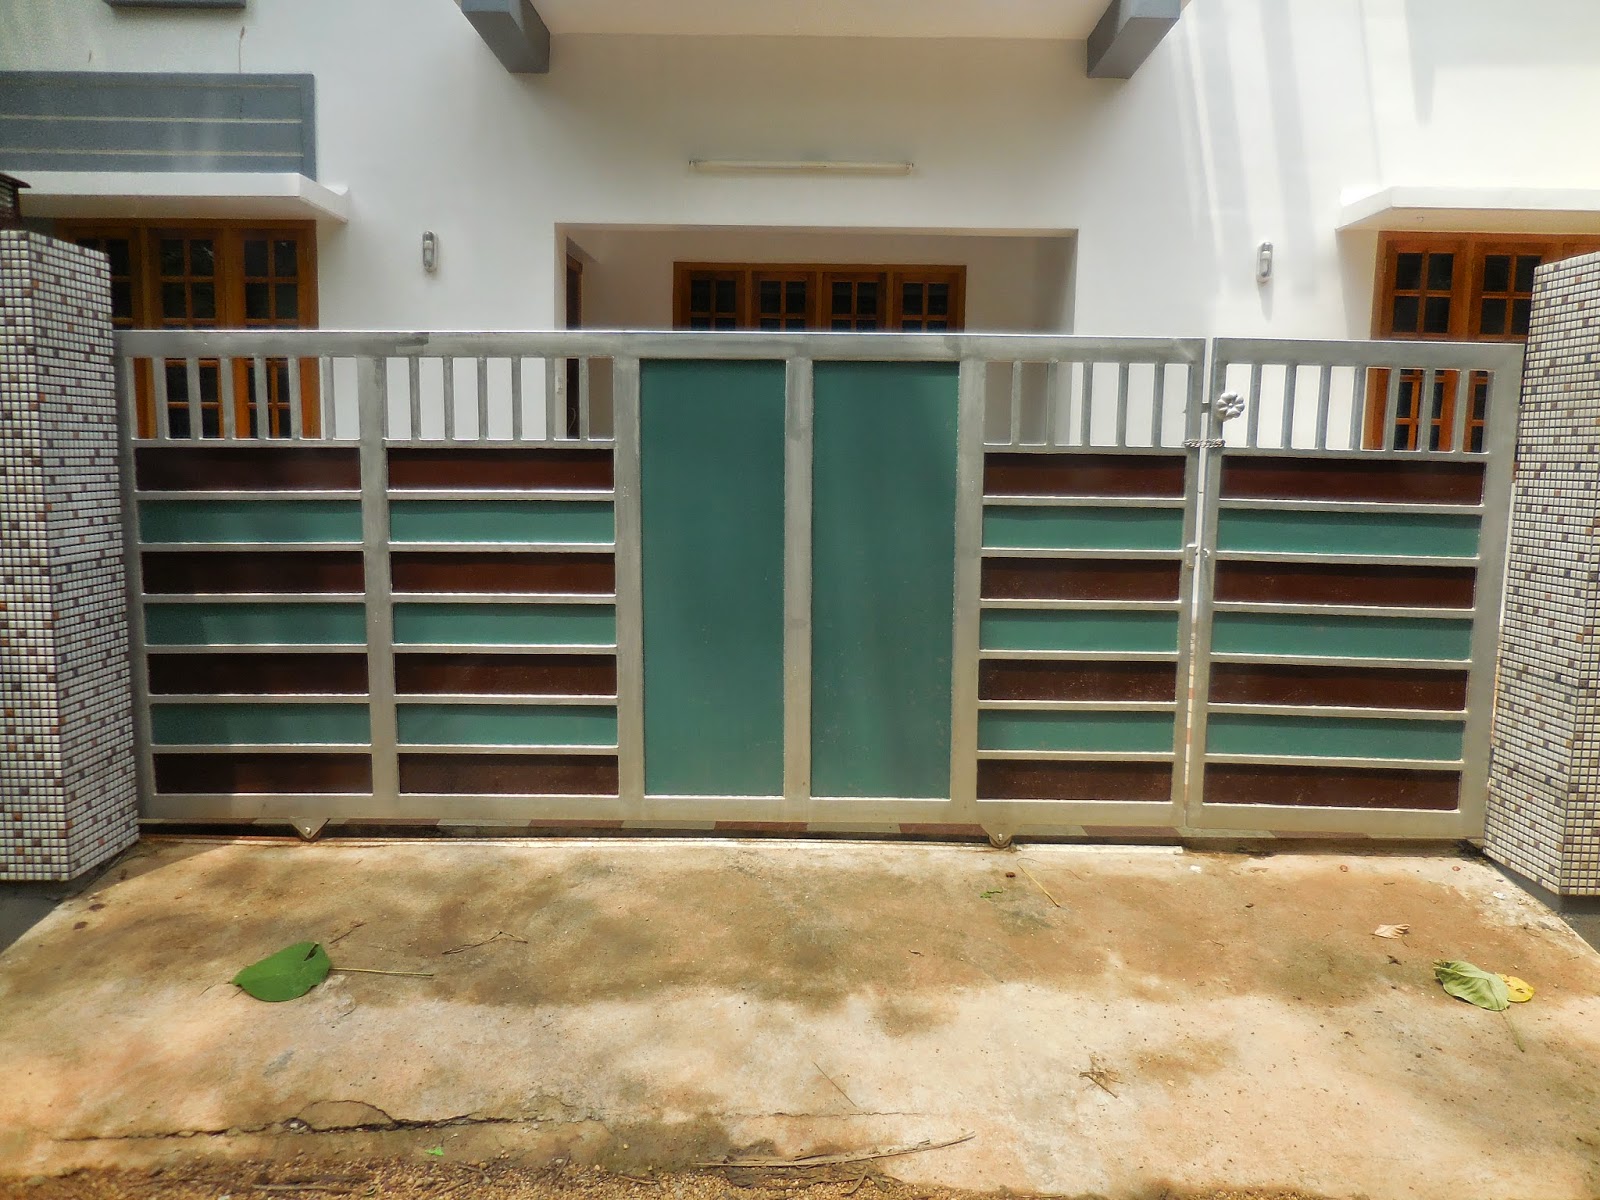 Kerala Gate Designs: Kerala House Gates with different designs